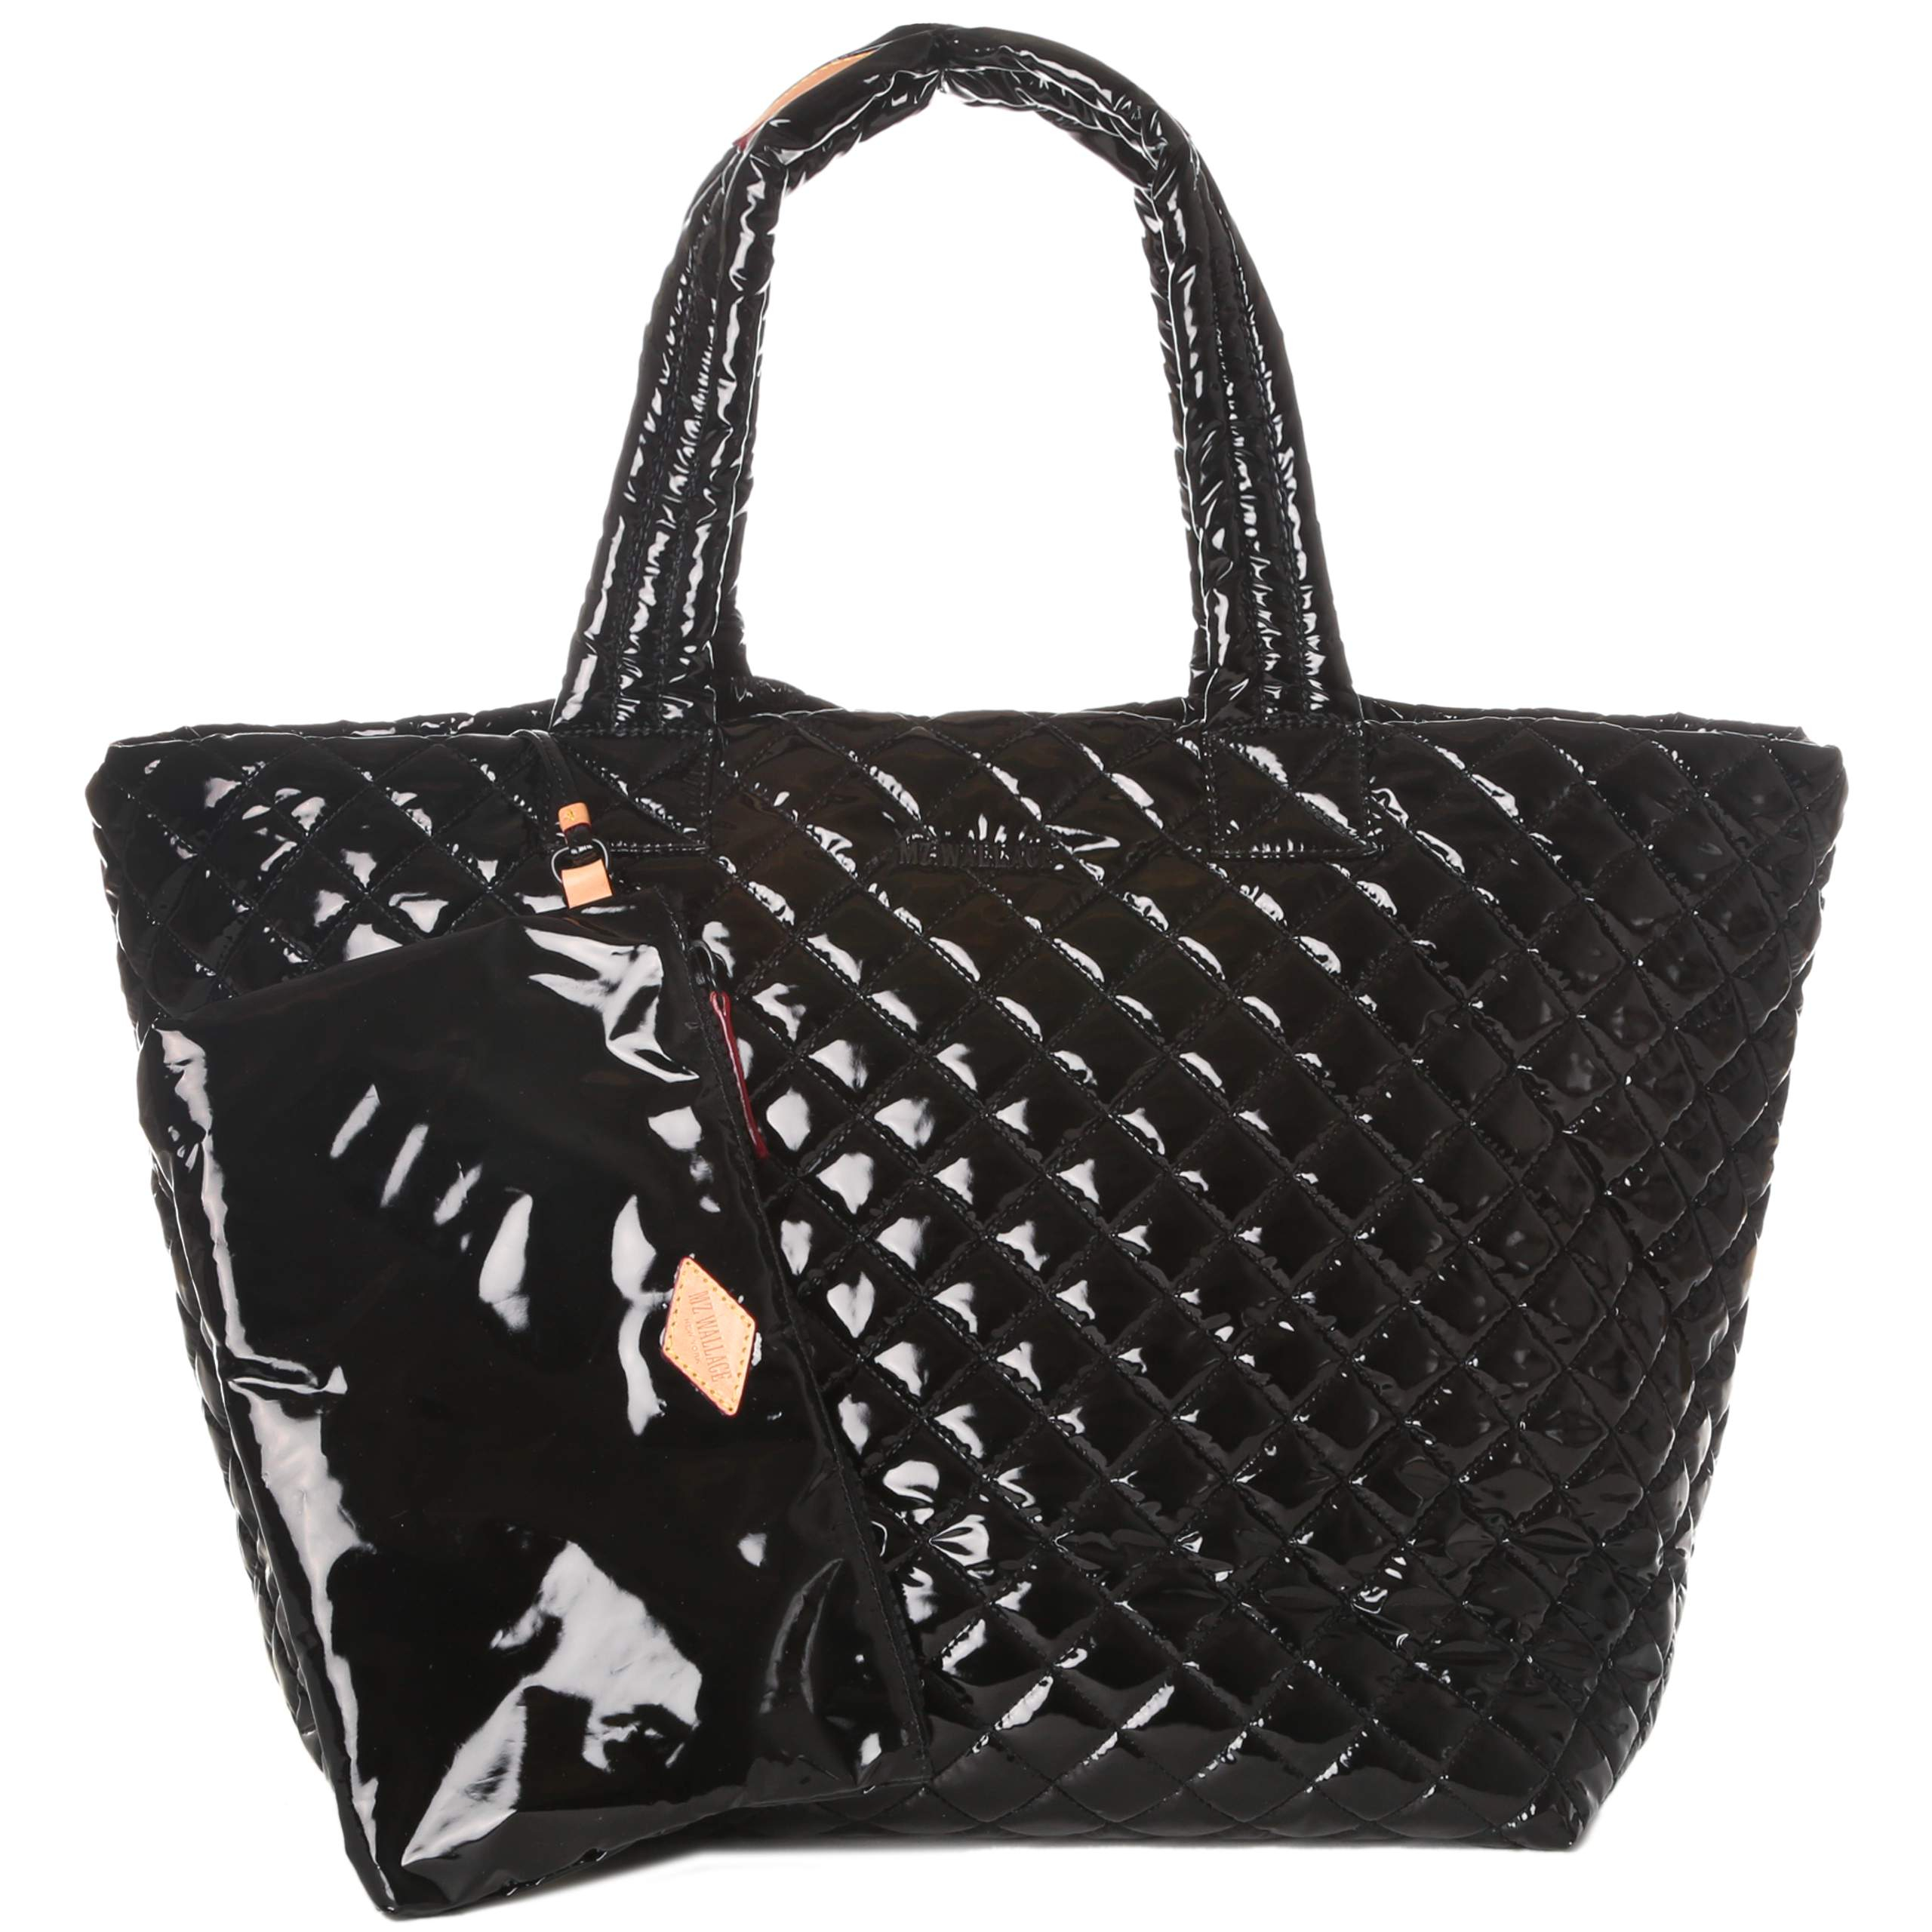 MZ Wallace Synthetic Large Metro Tote in Black - Lyst2560 x 2560